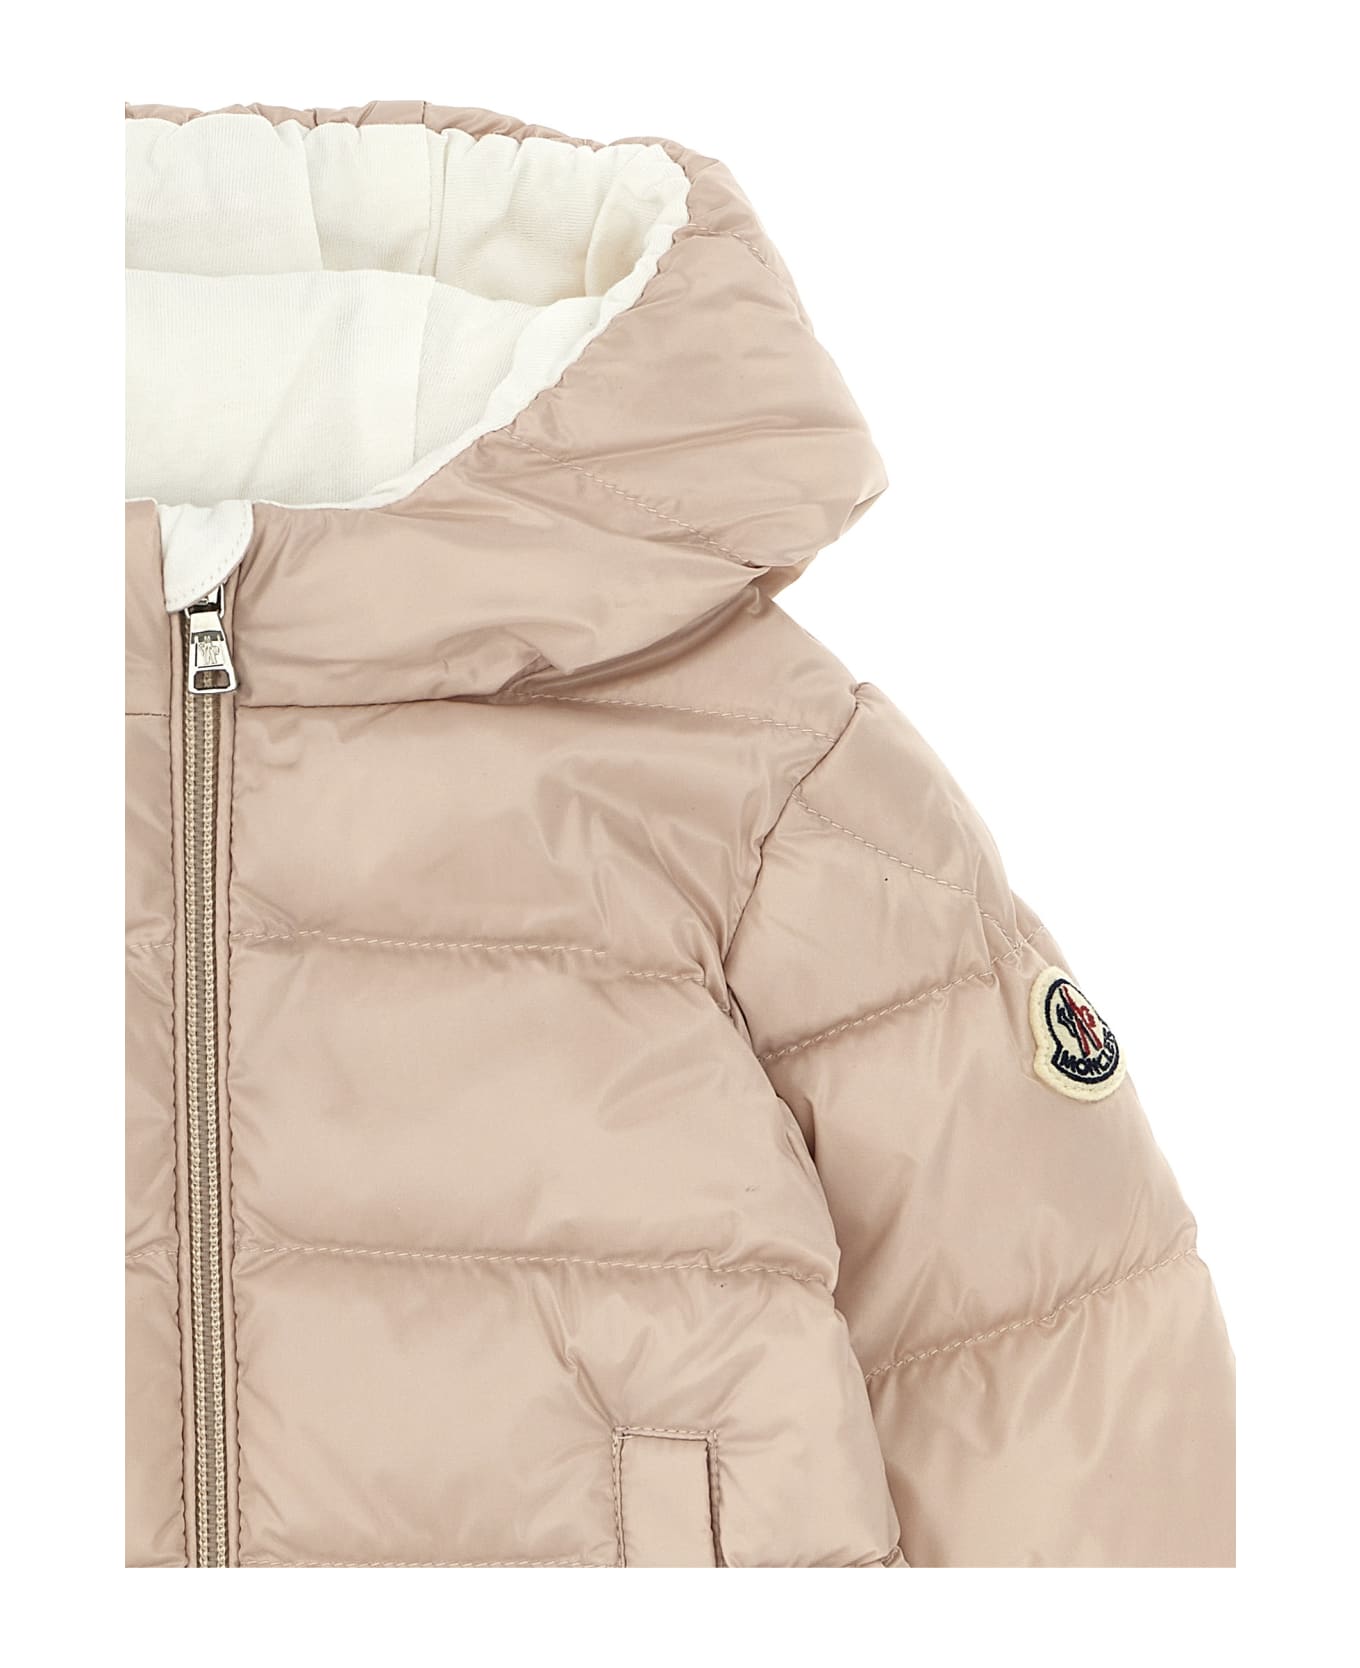 Moncler 'anand' Down Jacket